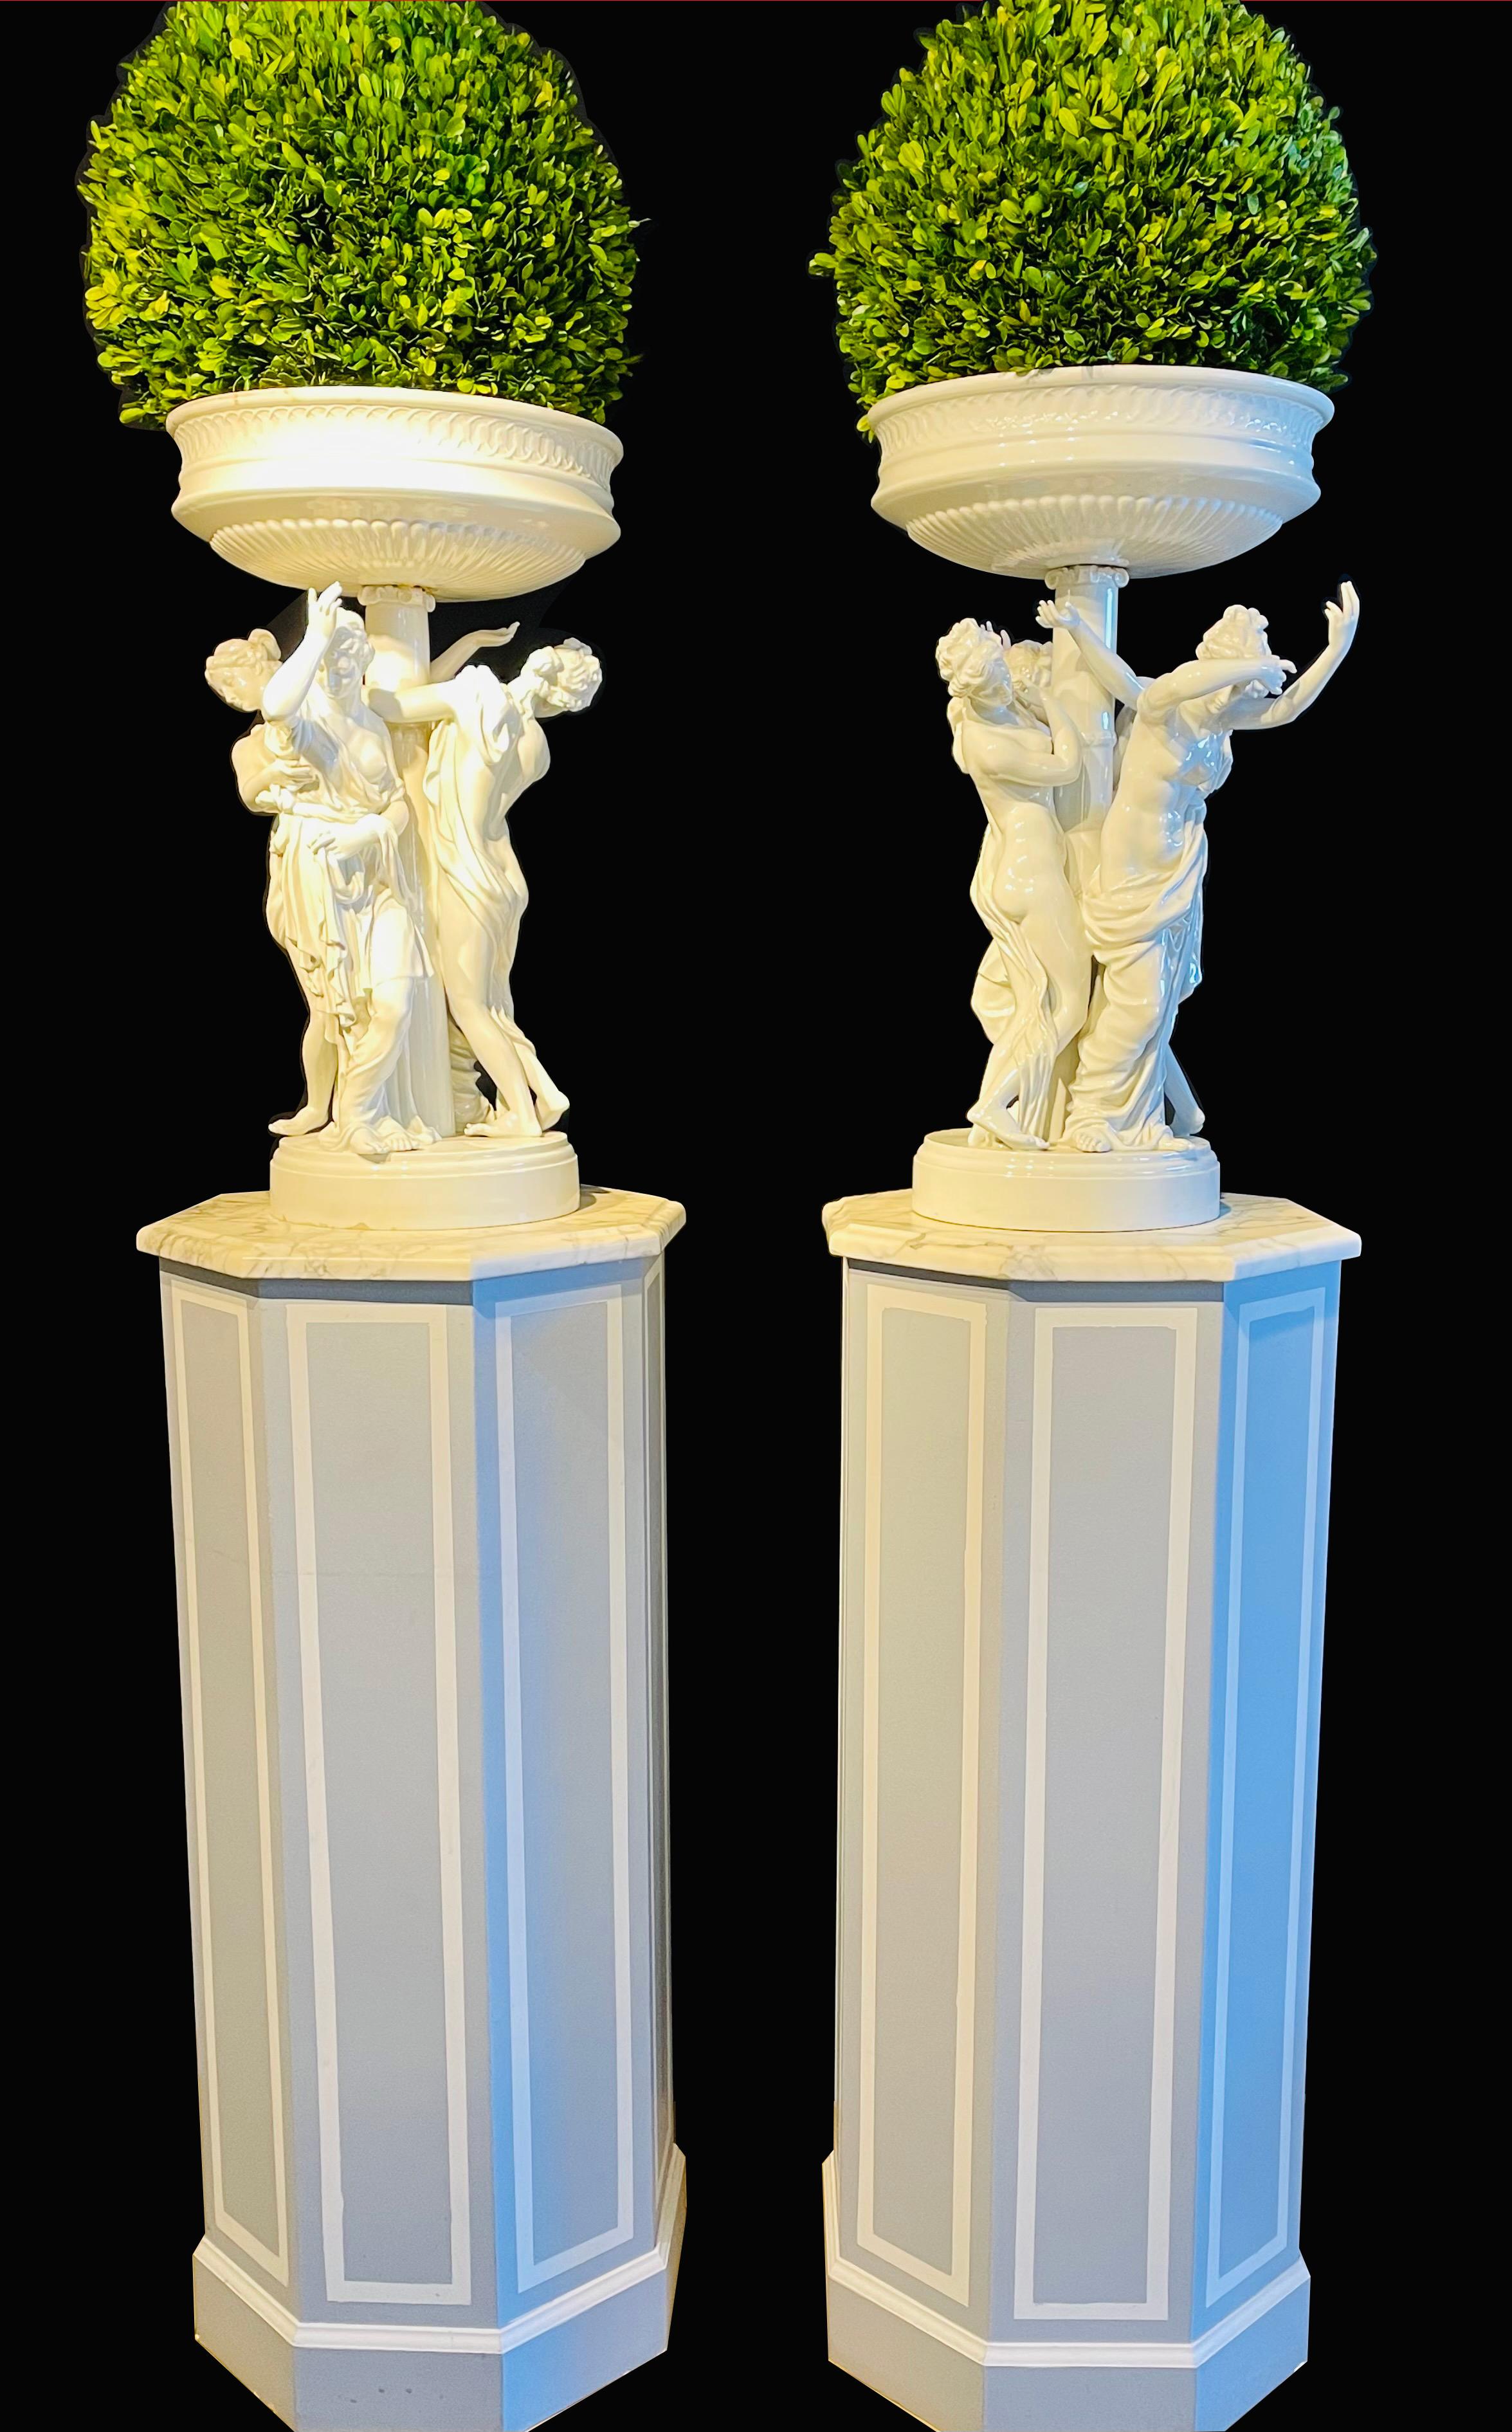 Pair of antique Dresden planters jardinières each with four dancing nymphs. A stunning pair of 20th century Dresden jardinières or planters. This one of kind pair of monumental figural Jardinières are impressive in fine condition. Each planter